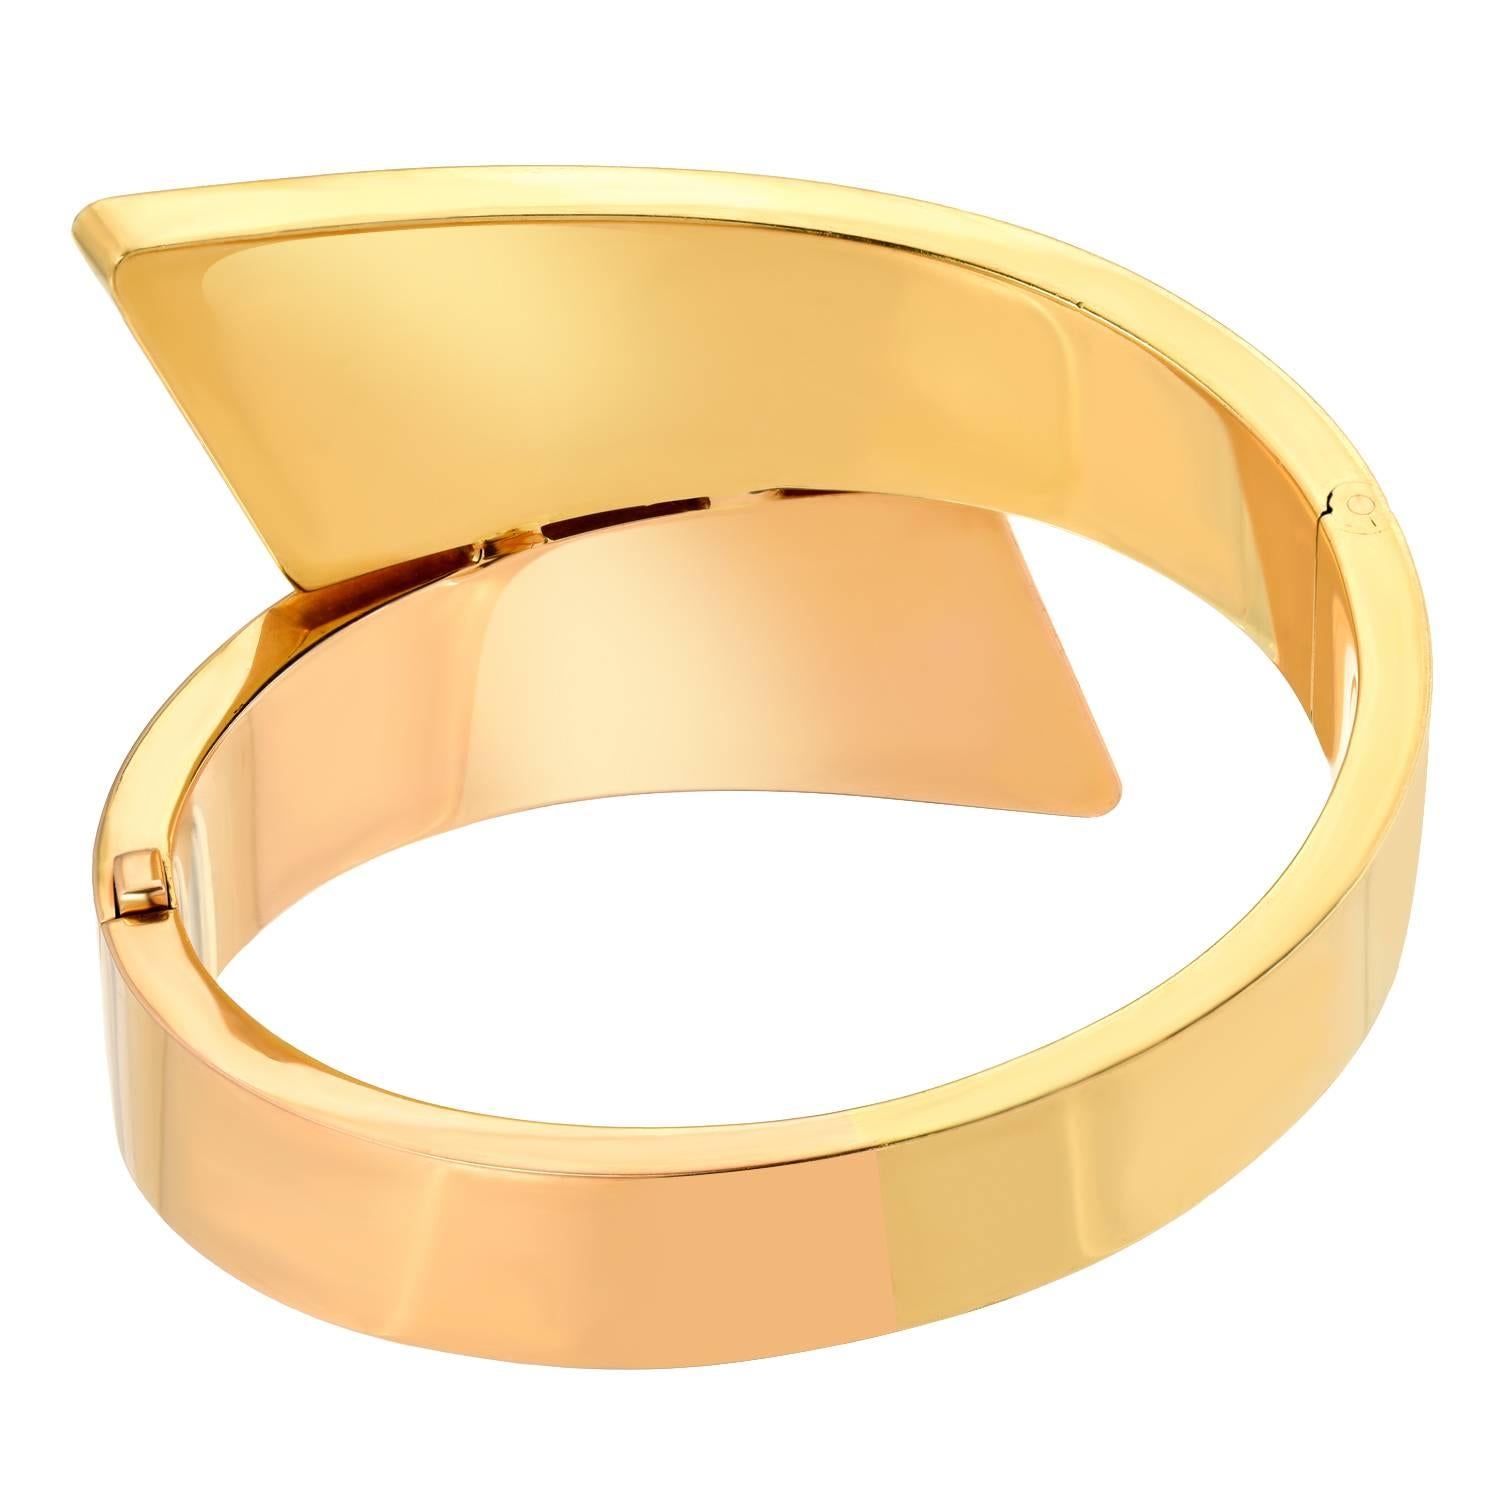 Designed with a hinged bypass motif comprising rose and yellow gold
Metal: 18k yellow and rose gold
Size/Dimensions: 17.8 cm, 4 cm at widest point
Marks: 750 S
Gross Weight: 80.5 grams
